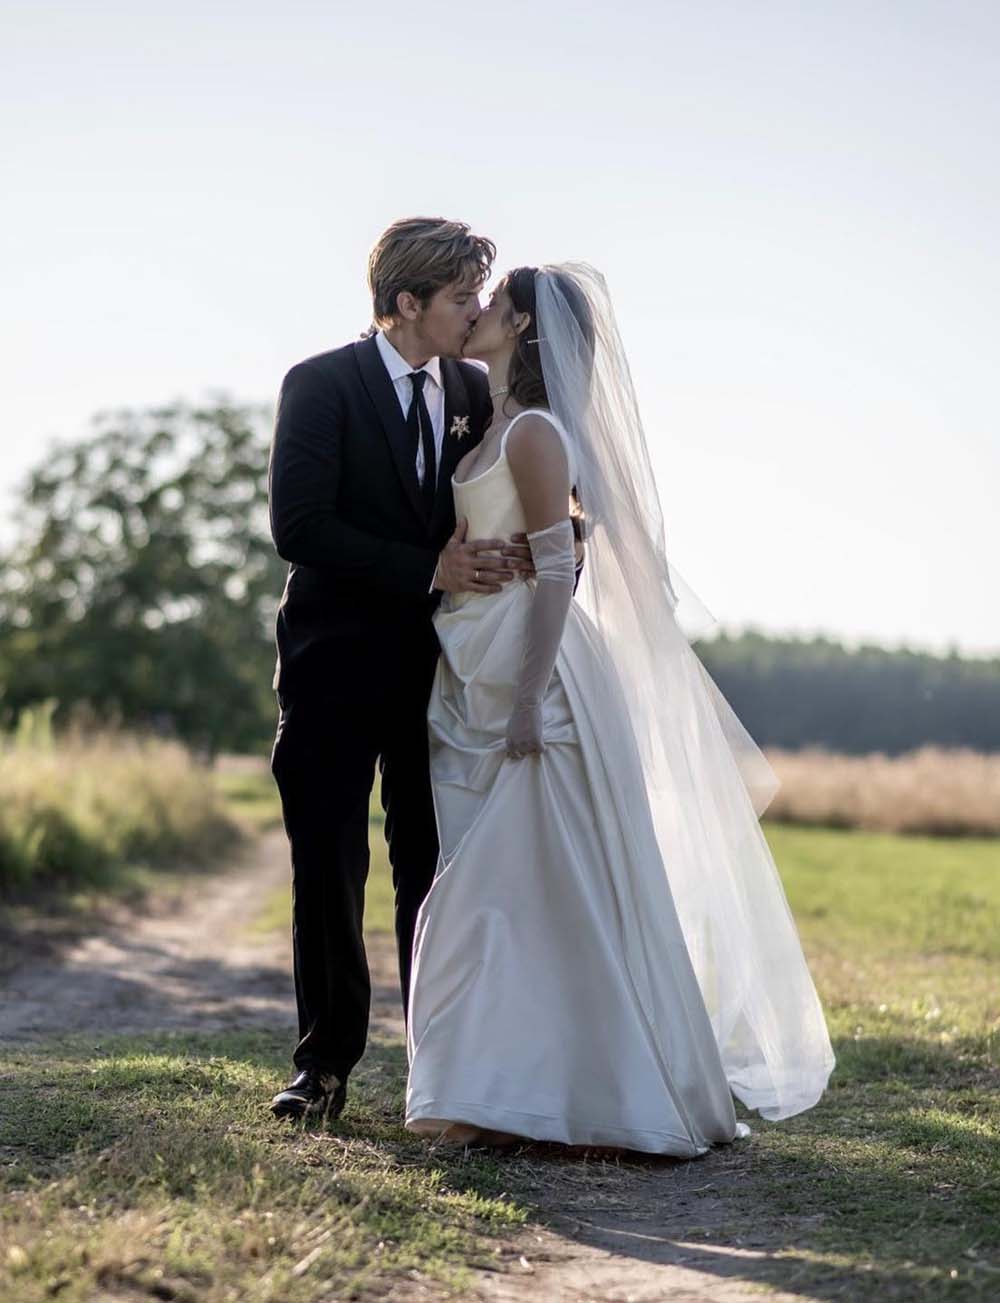 Dylan Sprouse and Barbara Palvin Wedding